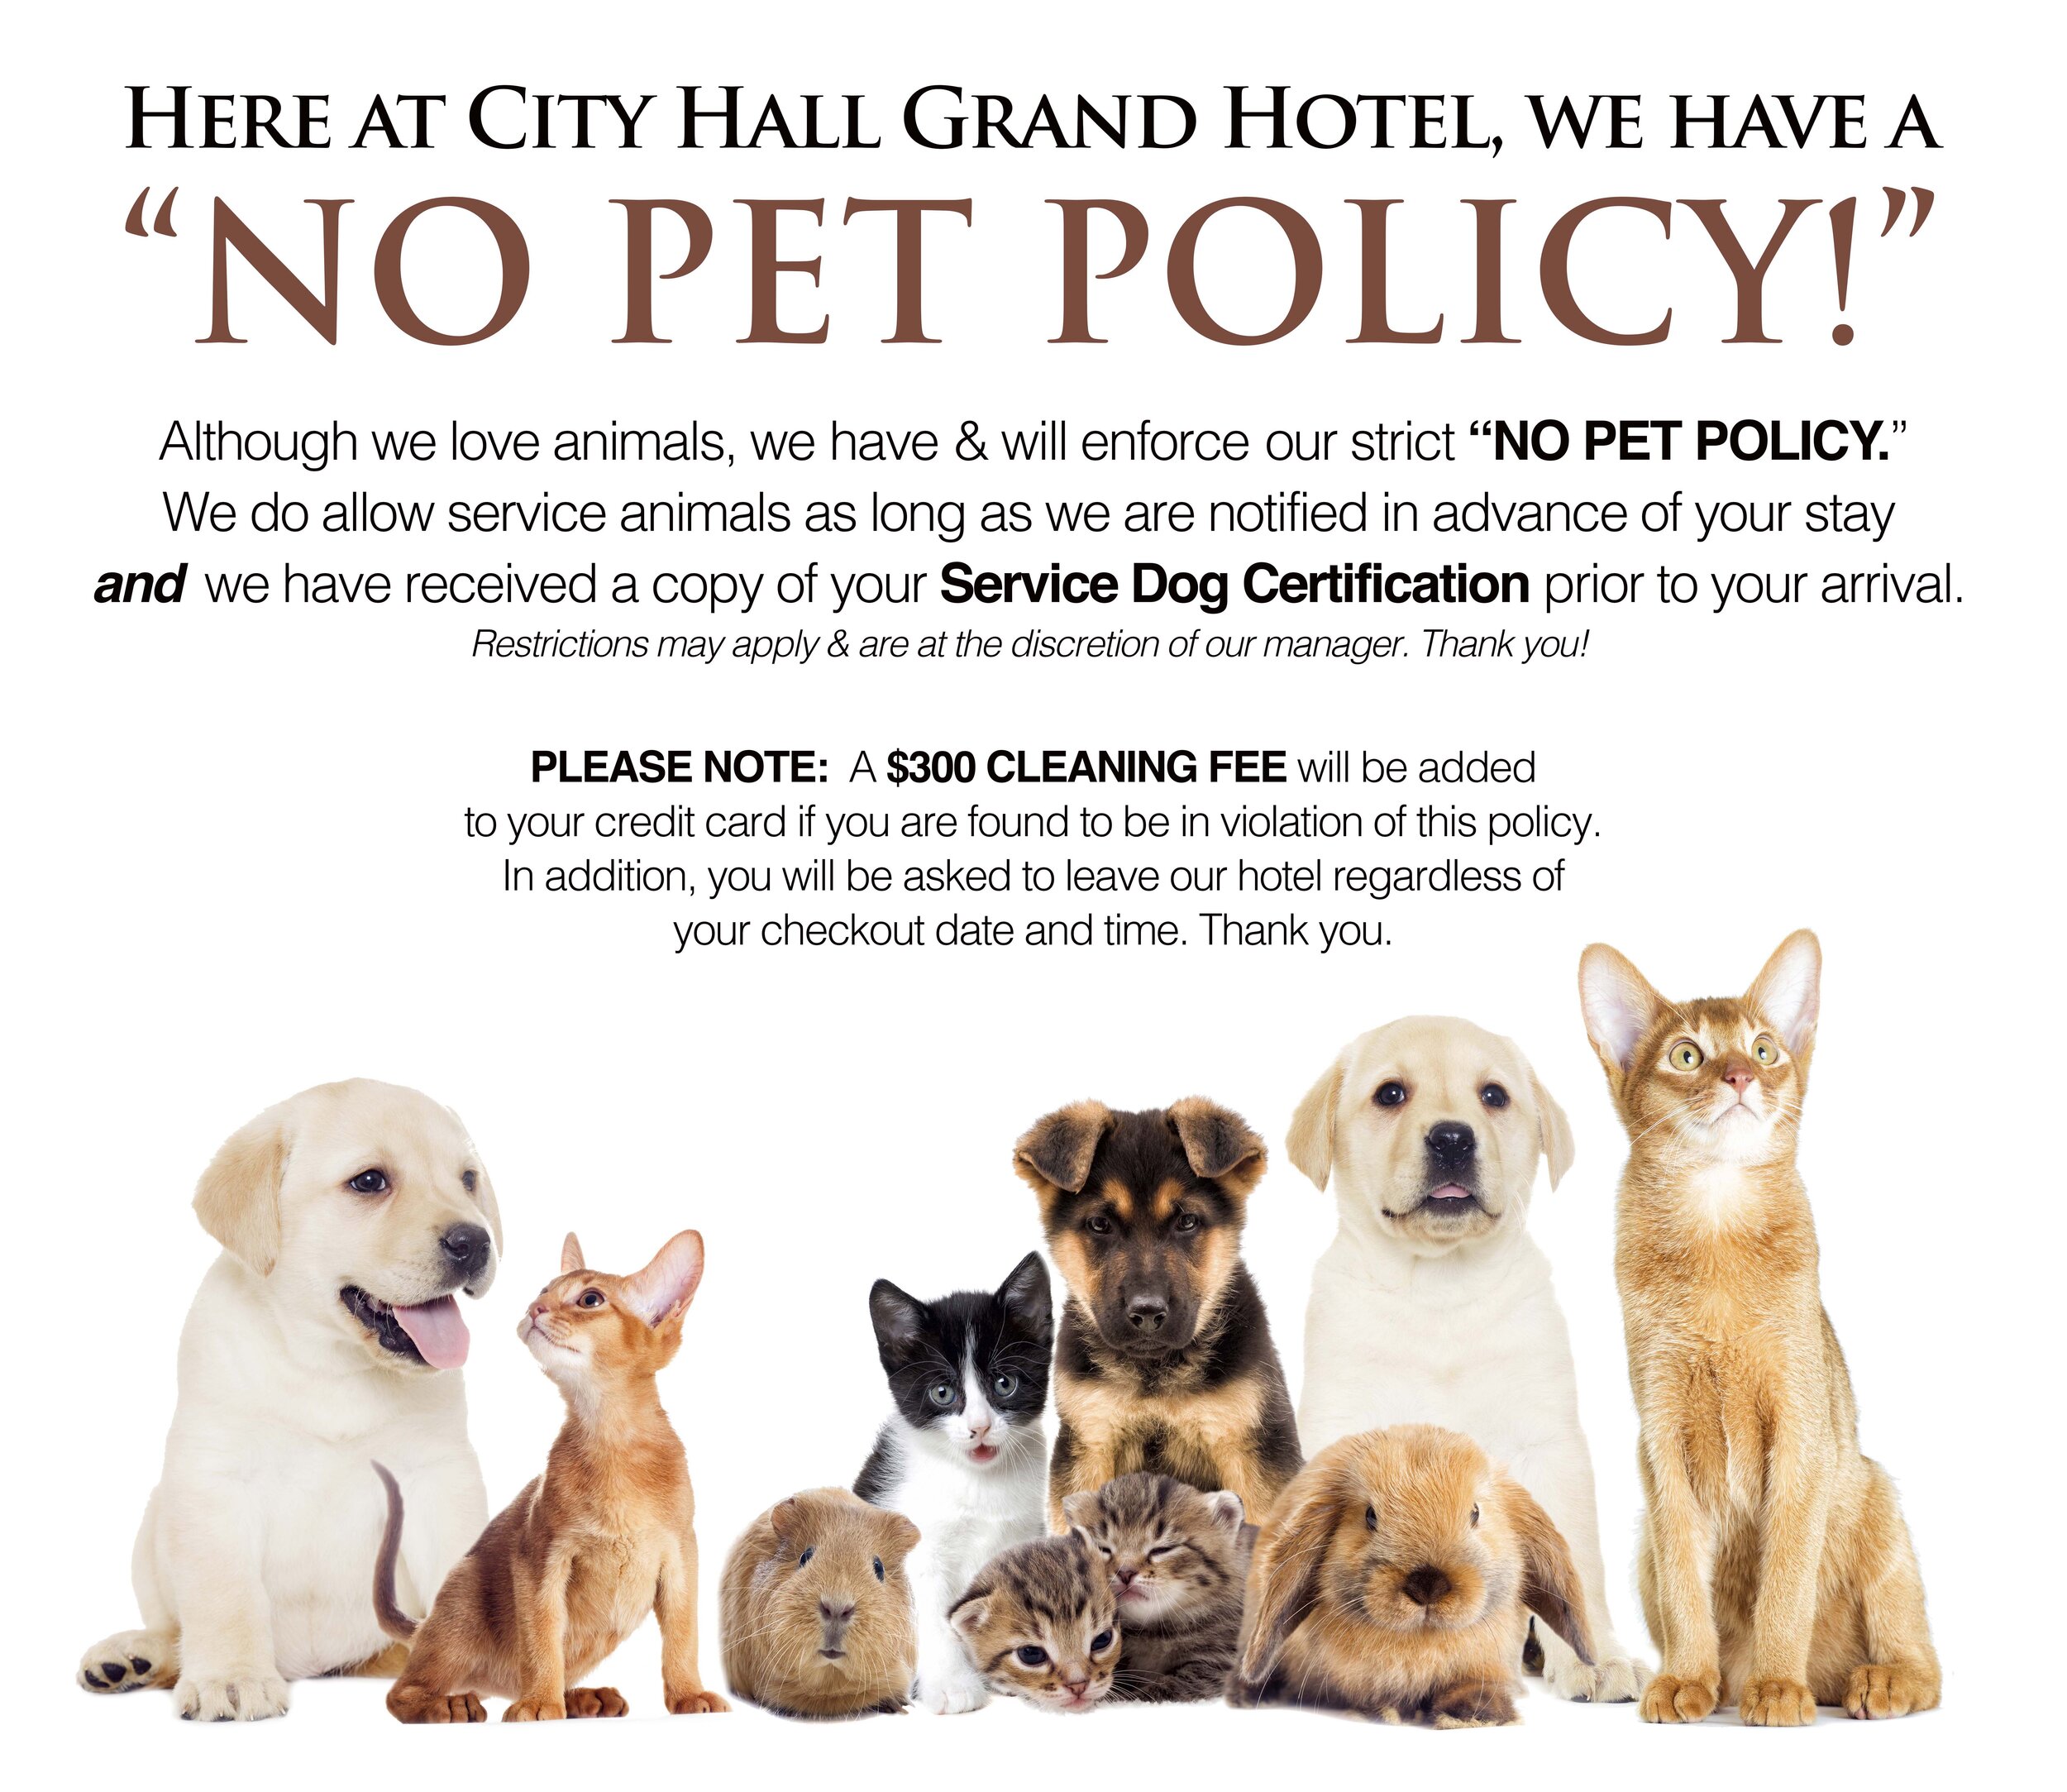 can a hotel ask for service dog papers